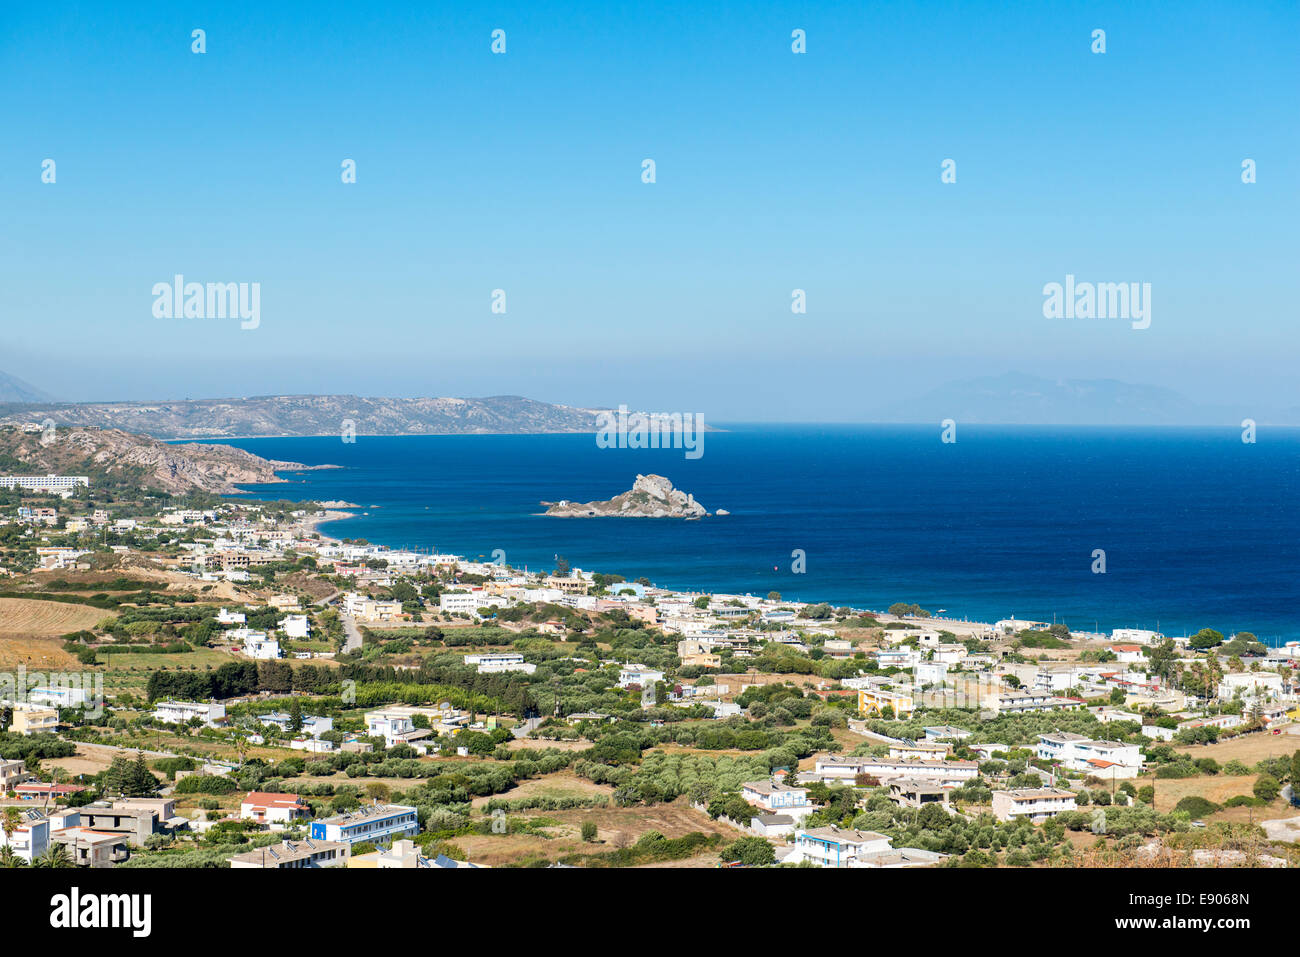 Panoramic view over Kefalos and Kastri island in the Mediterranean sea, island of Kos, Greece Stock Photo